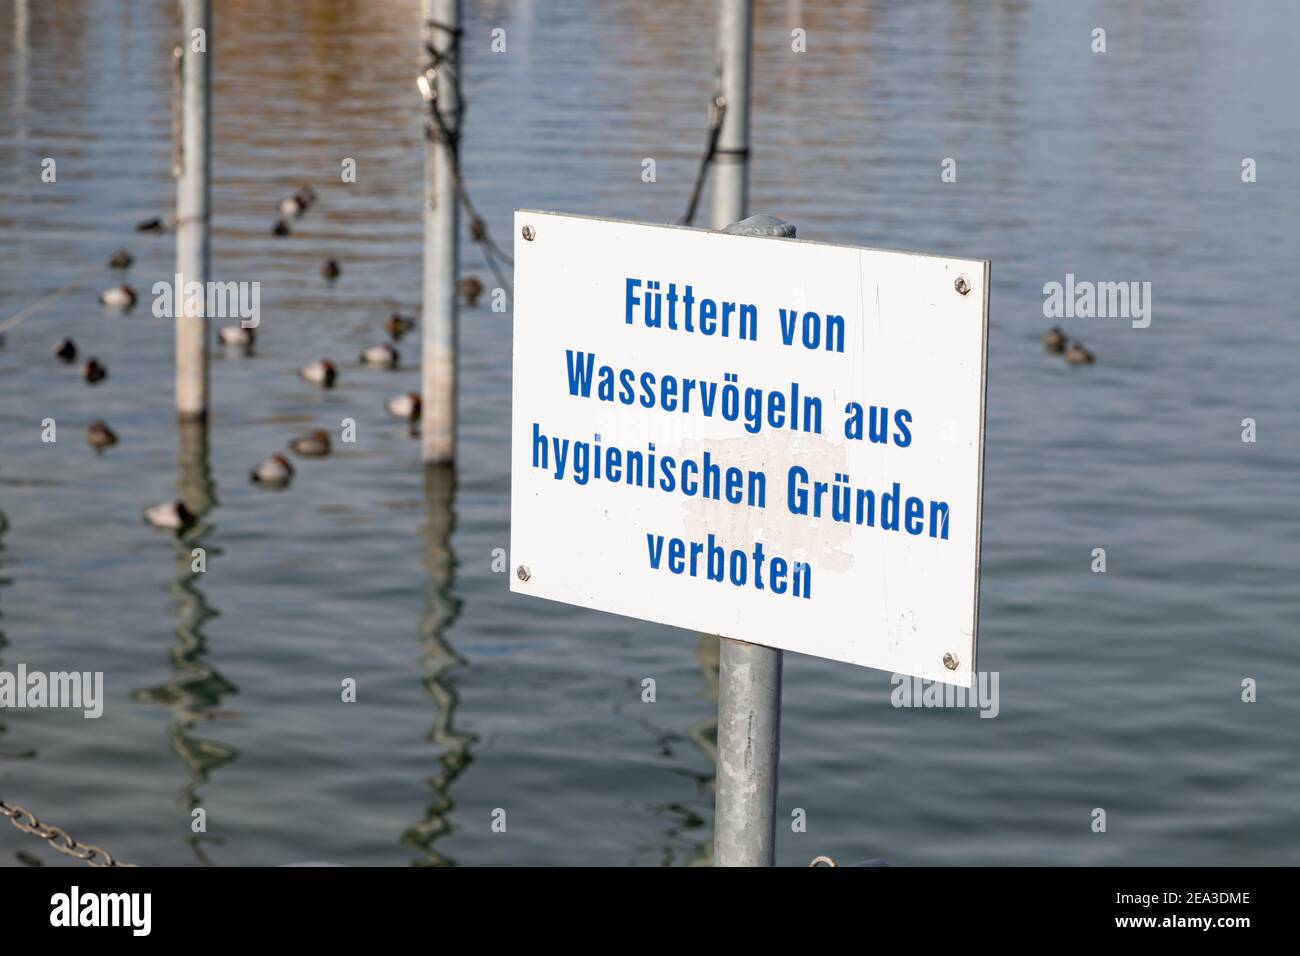 prohibition sign feeding forbidden, german text translation: feeding of waterfowl forbidden for hygienic reasons, swimming birds seen in the backgroun Stock Photo